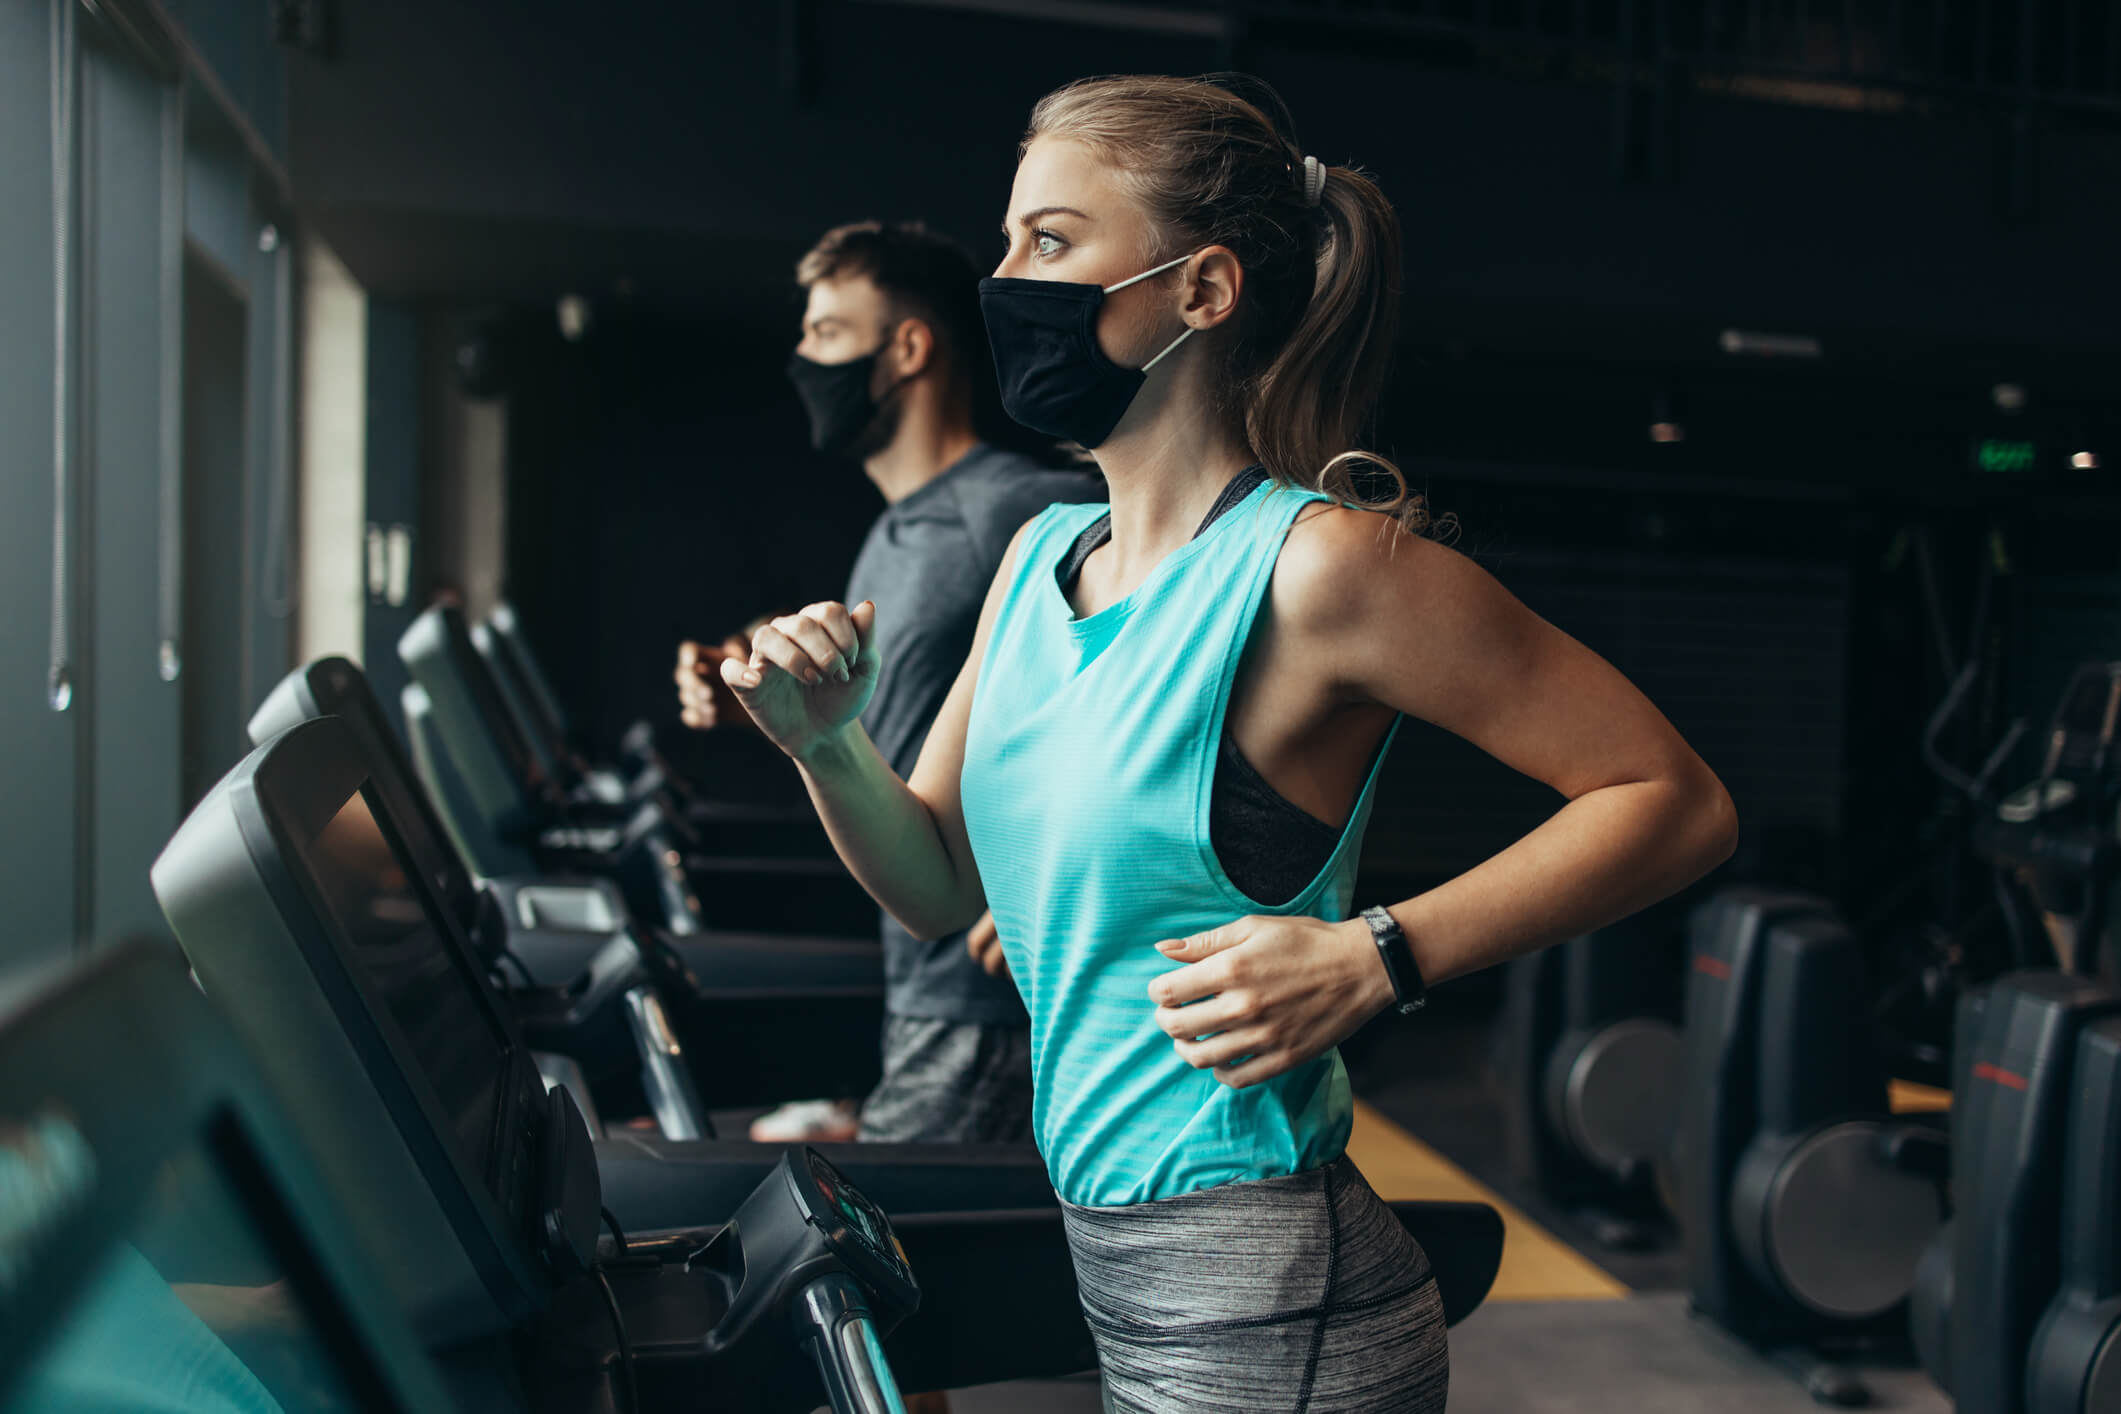 Woman and man on treadmill wearing masks